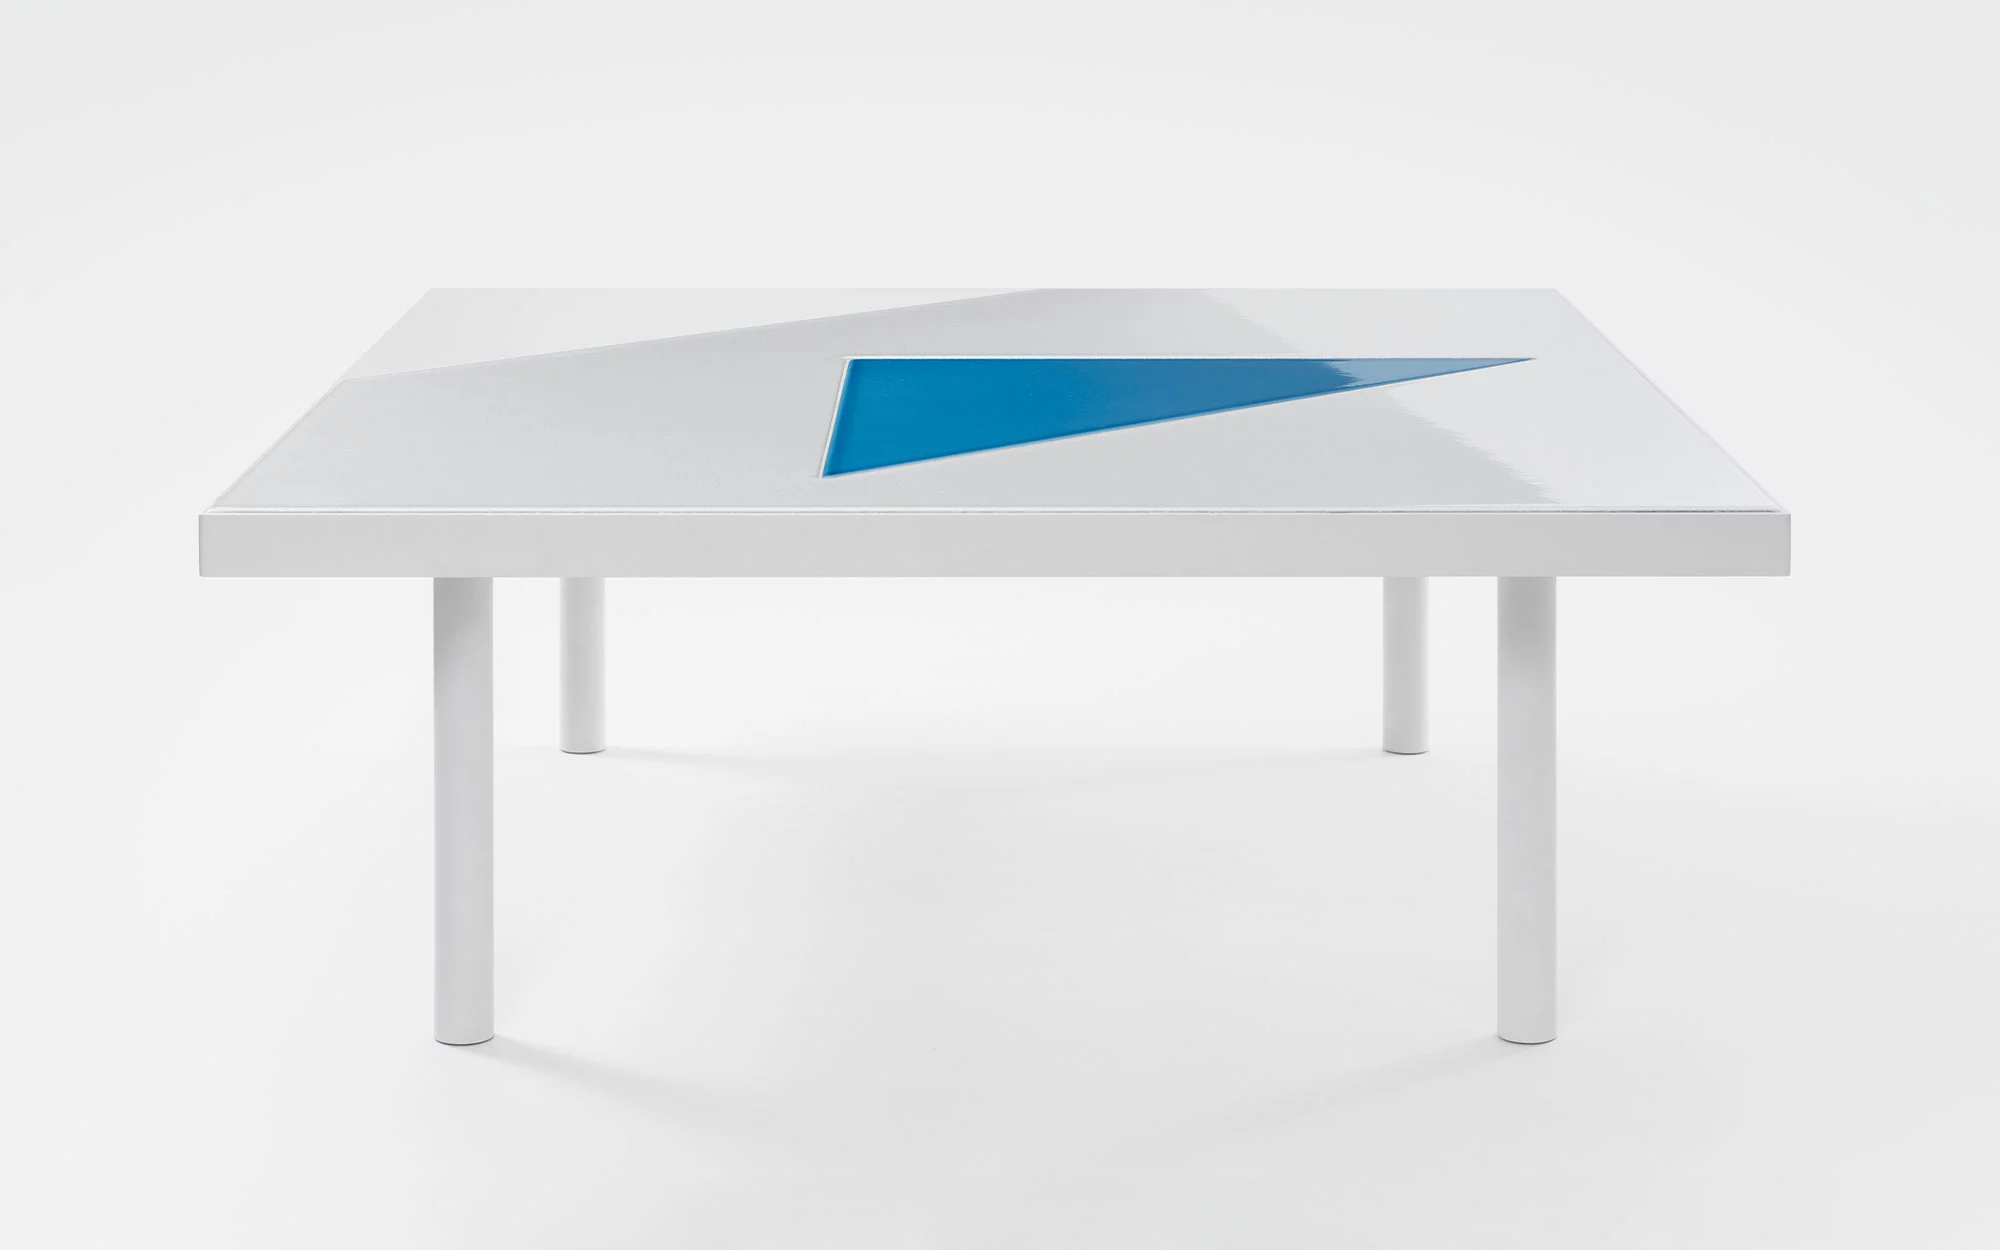 Translation Triangolo Coffee Table - Pierre Charpin - Resemblance(s).